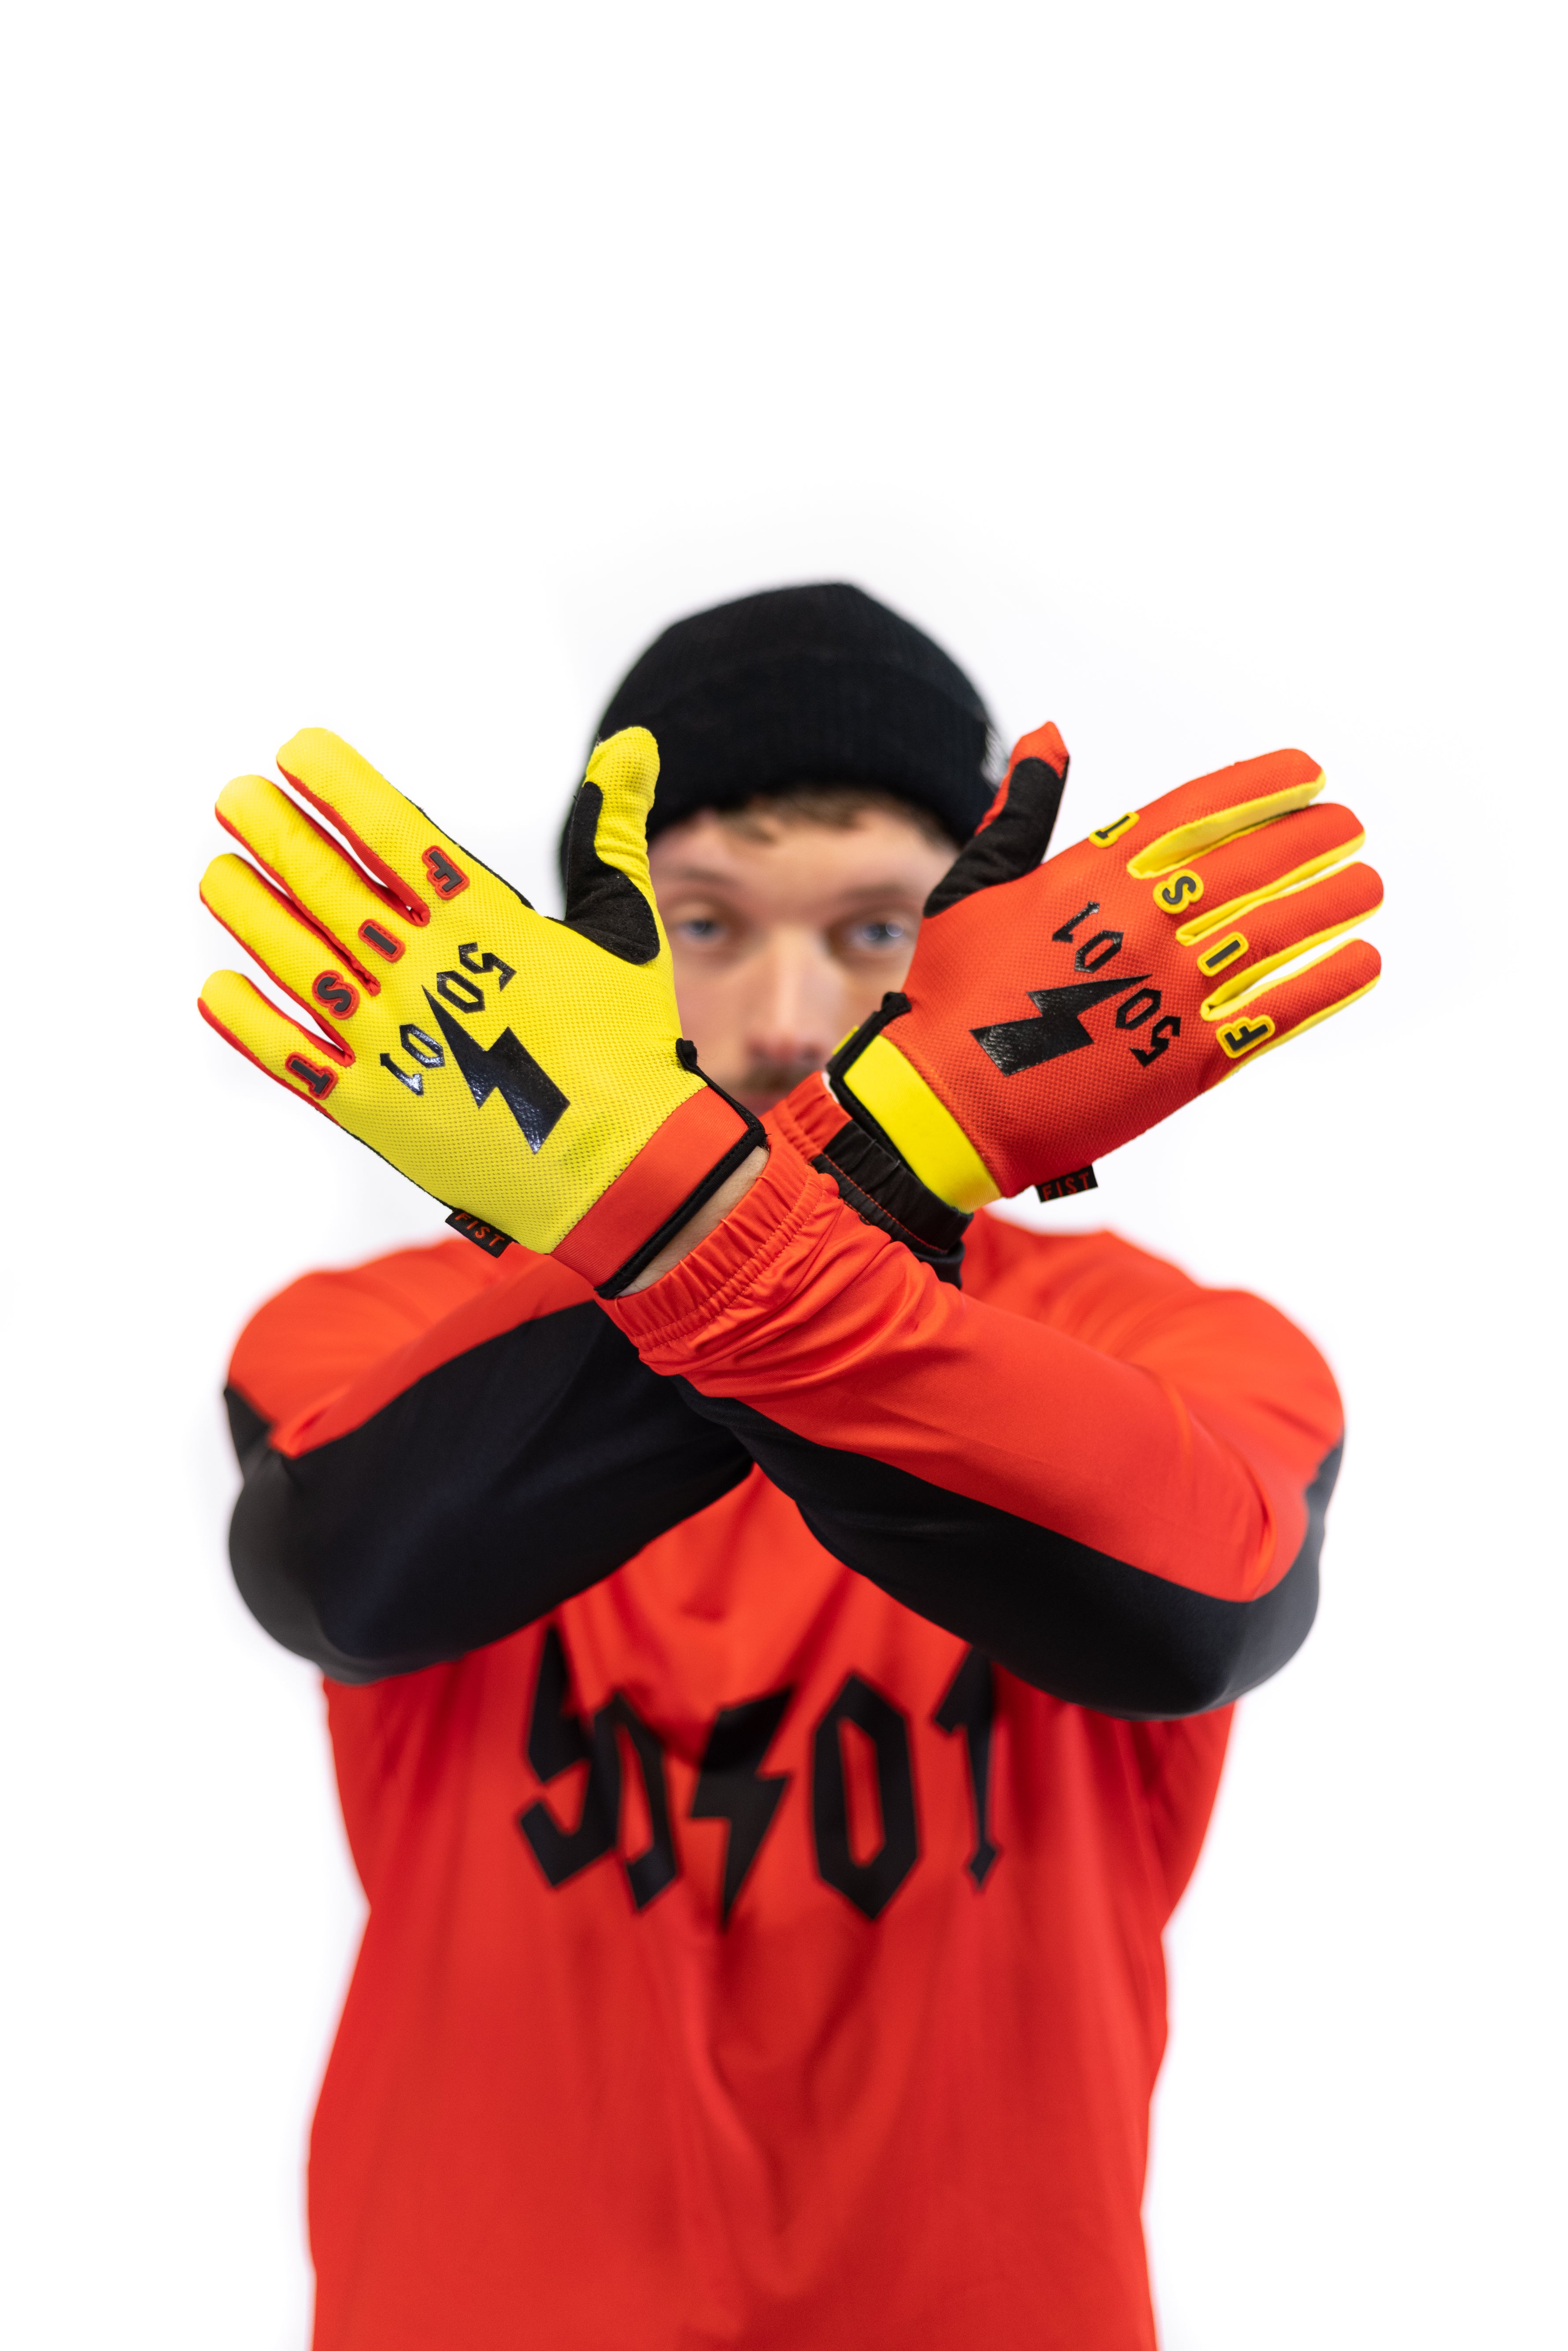 50to01 x FIST - LOUD GLOVES